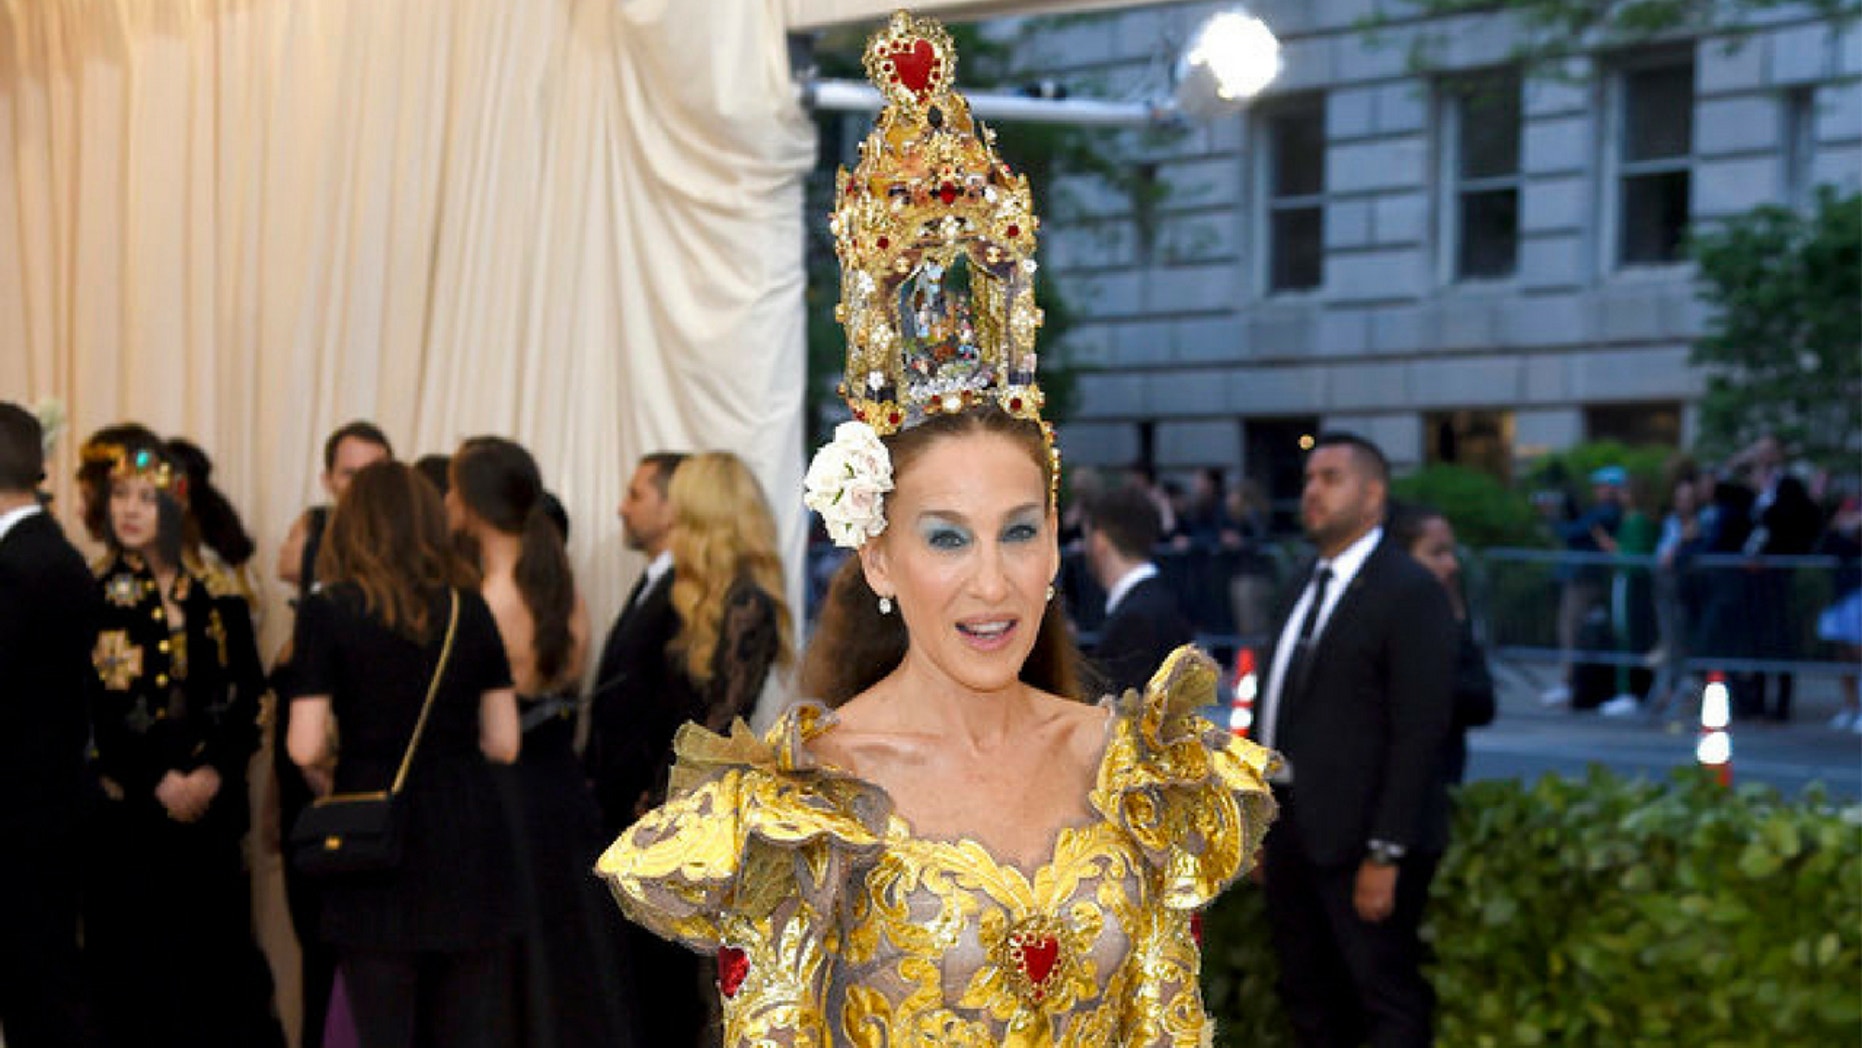 Sarah Jessica Parker S Met Gala Ensemble Shamed By Social Media Users Saying She Looked Old